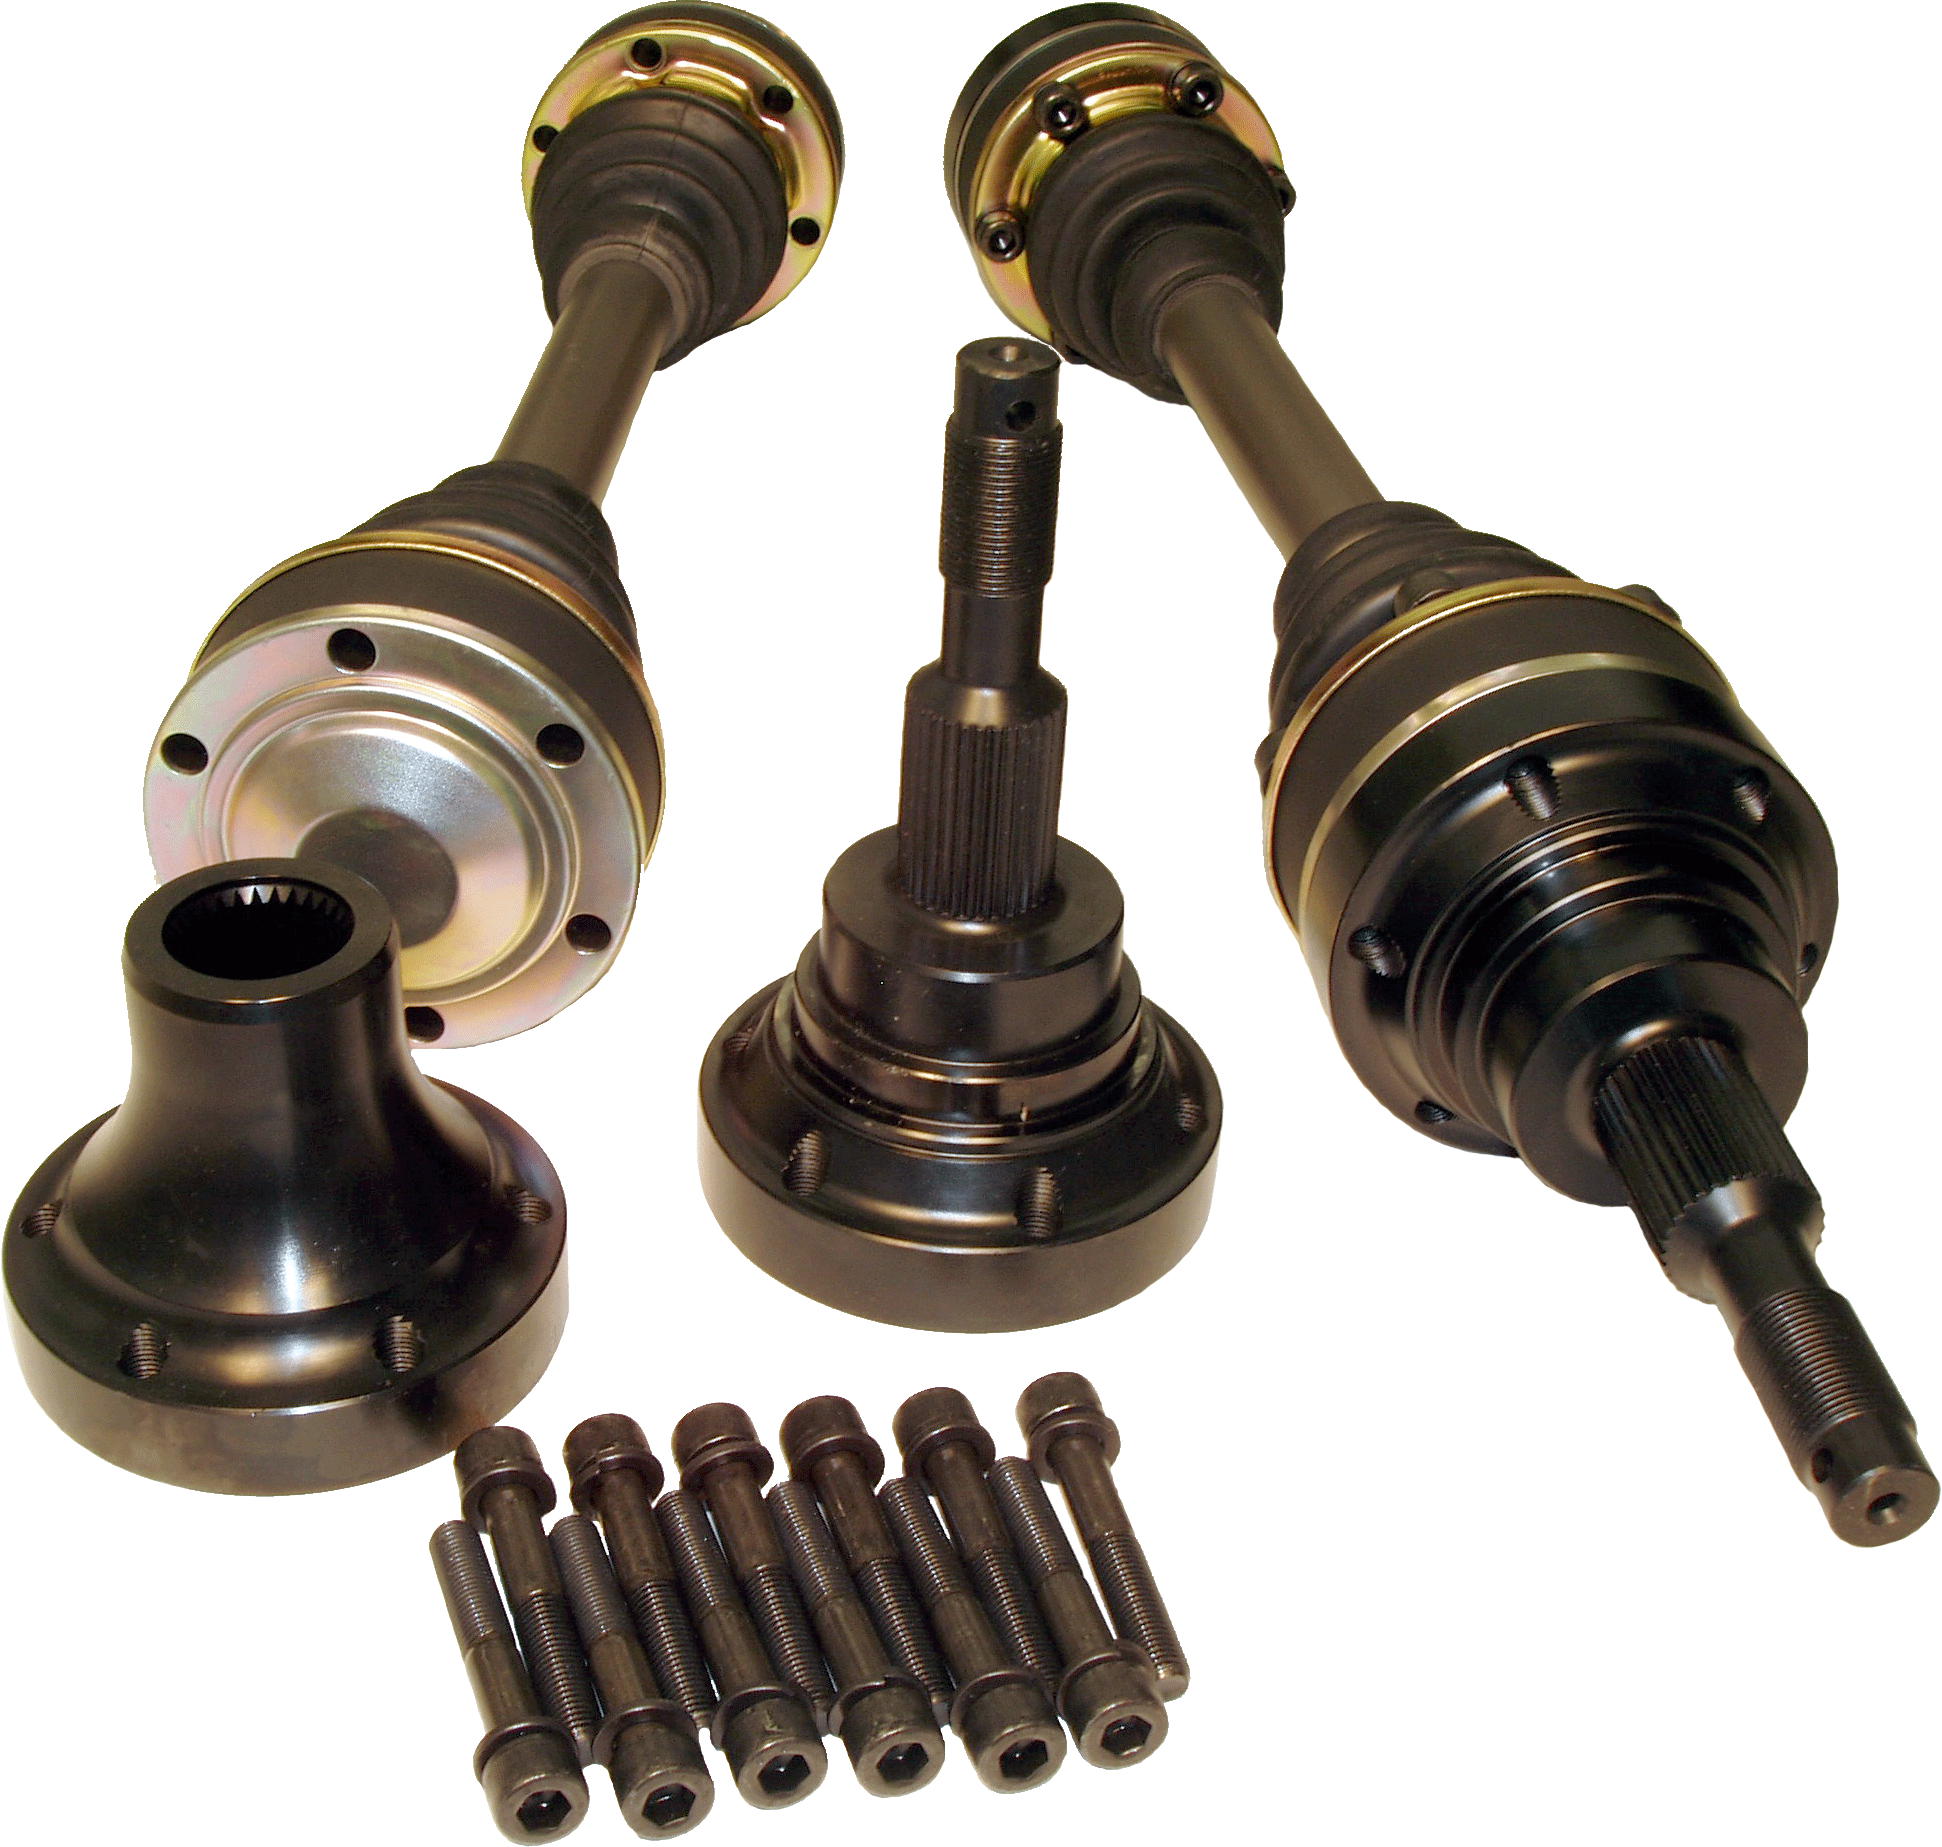 Driveshaft Shop 96-02 Viper 1100HP Level 5 Axle wit Diff Stubs